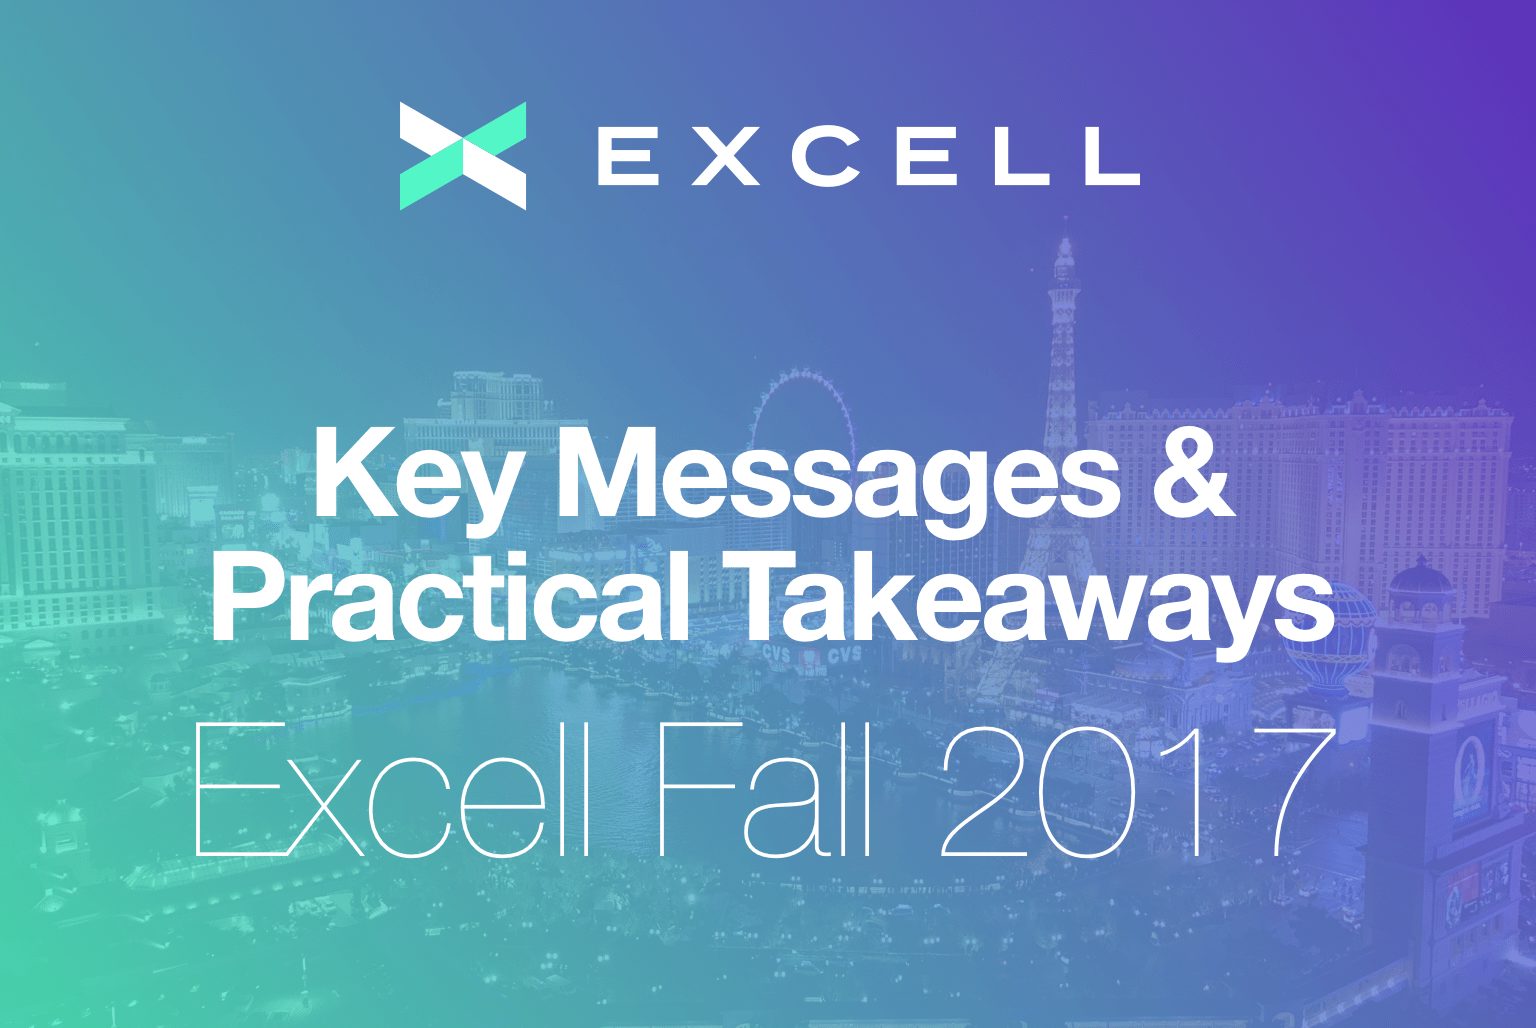 excell 2019 financial advisor conference events